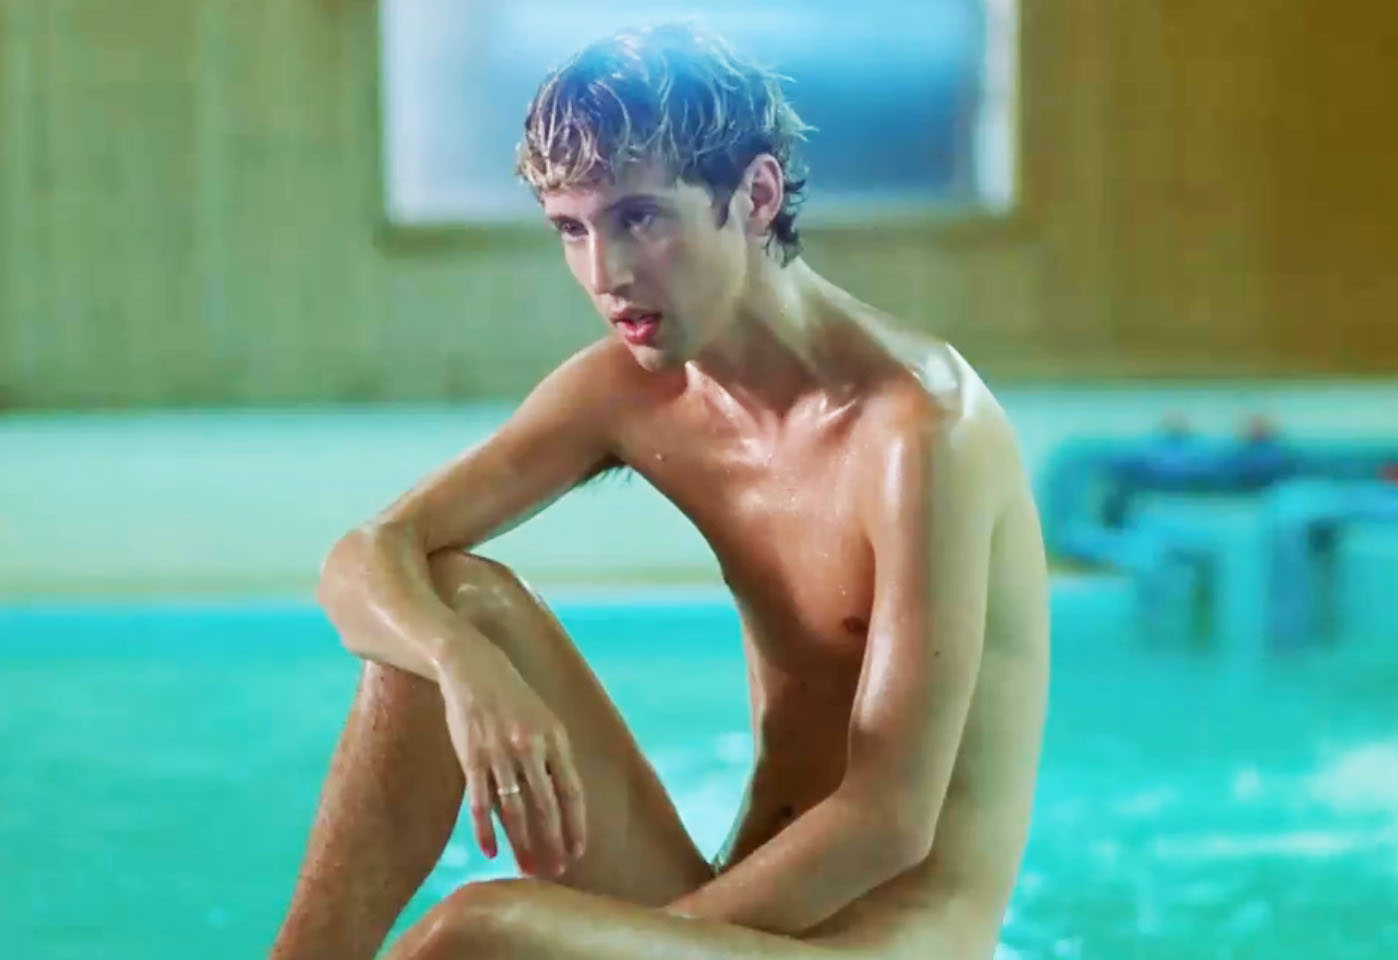 Troye Sivan is incredibly nude in his new Music Video!